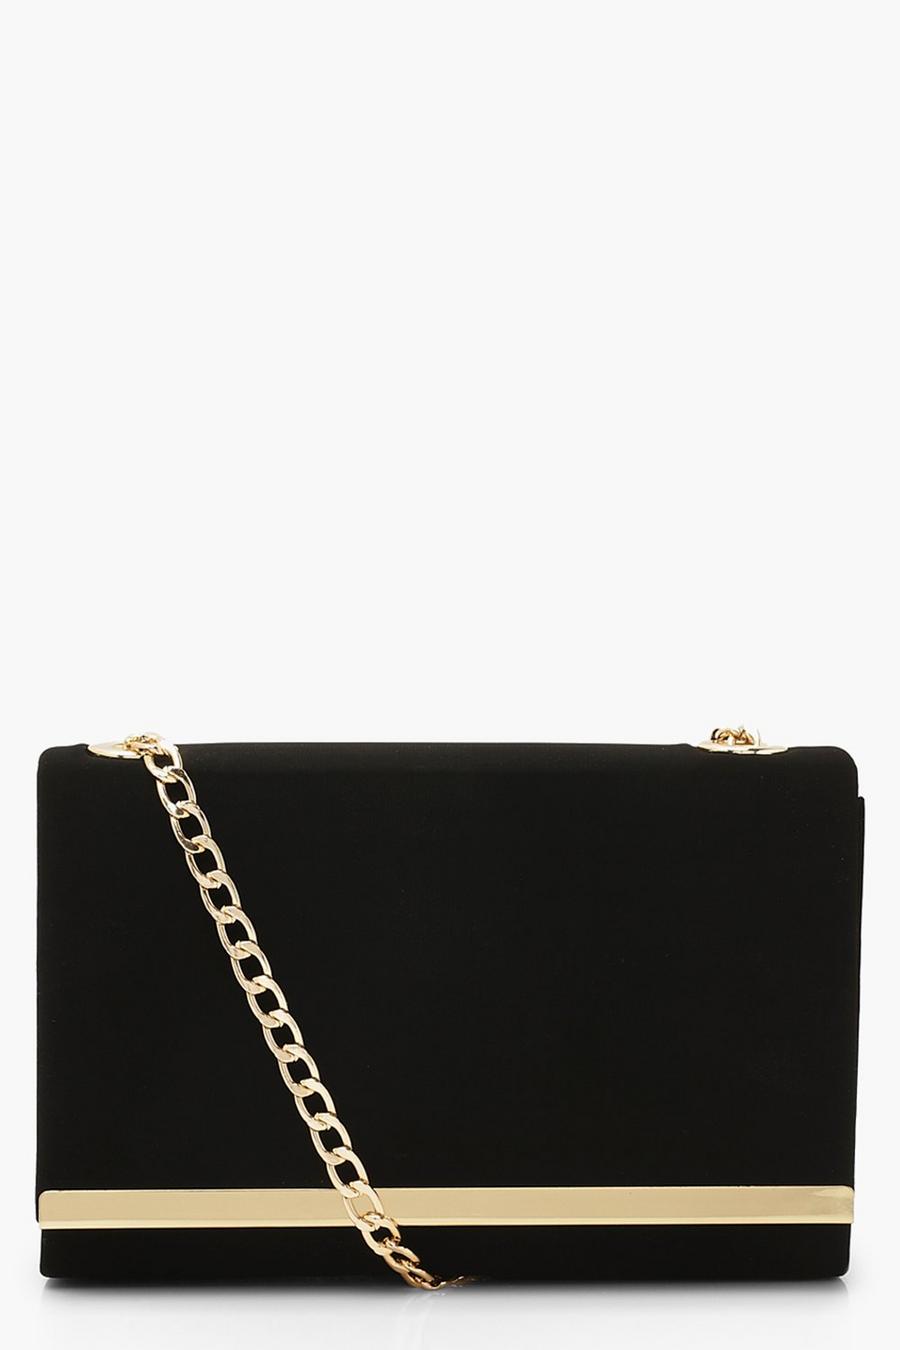 Black noir Structured Suedette Clutch Bag and Chain